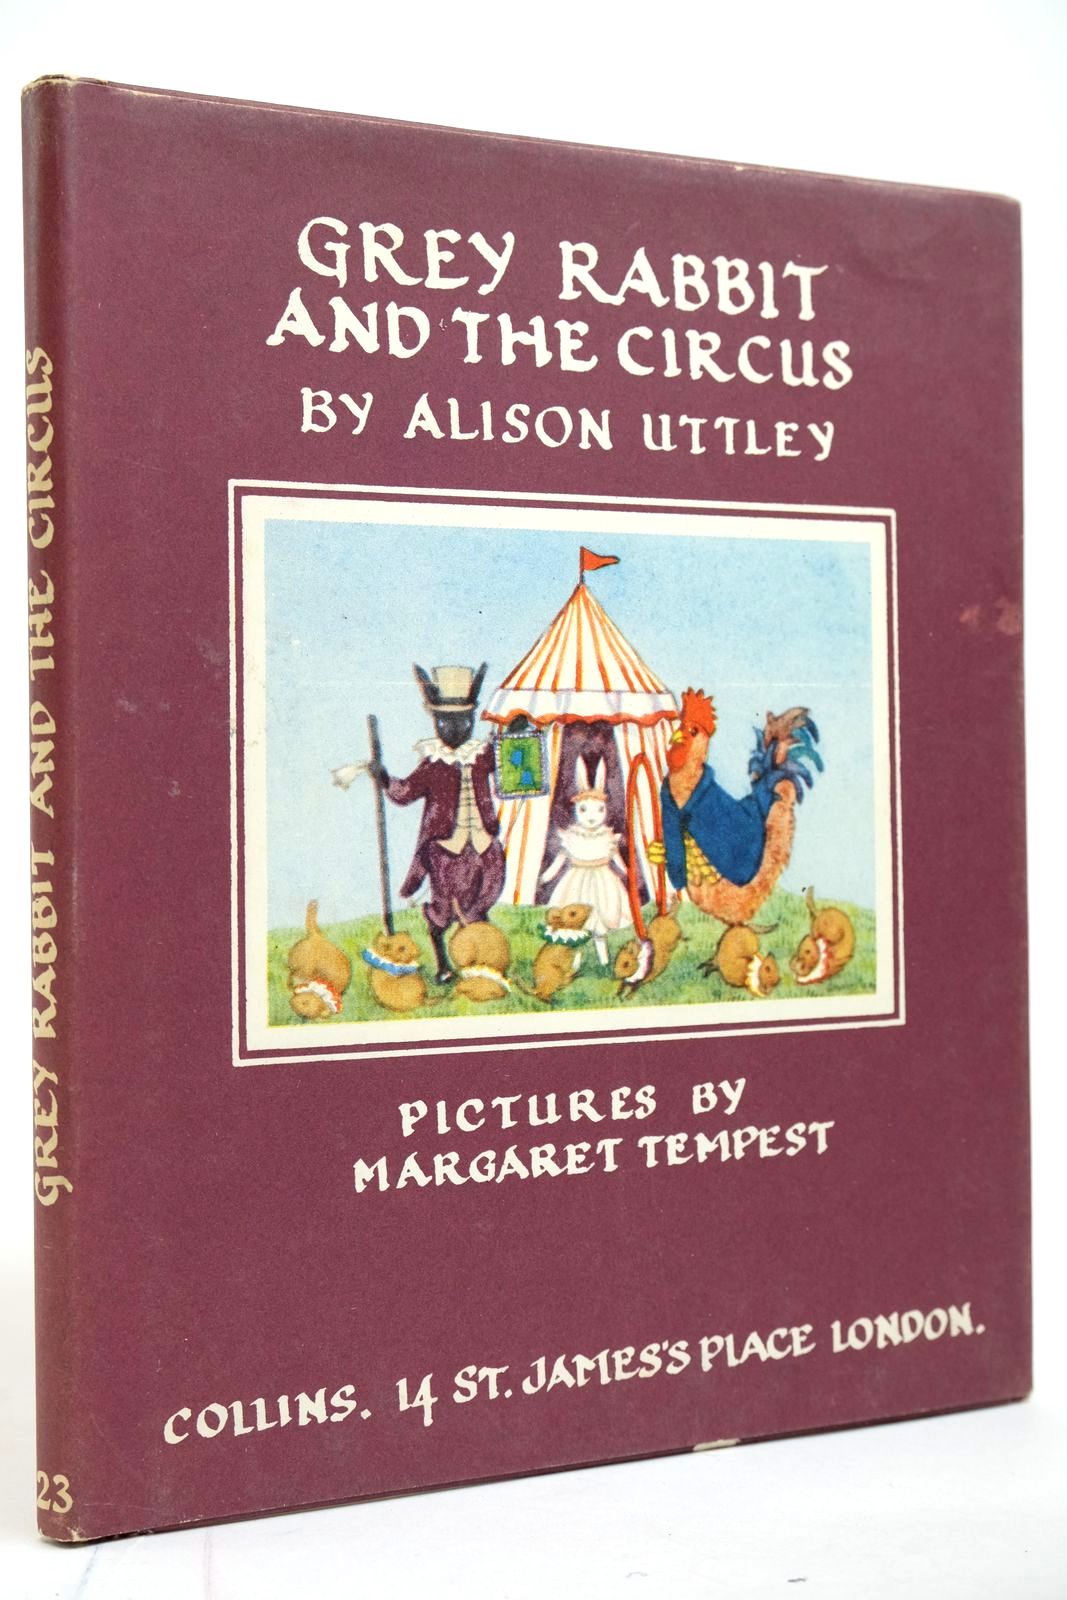 Photo of GREY RABBIT AND THE CIRCUS written by Uttley, Alison illustrated by Tempest, Margaret published by Collins (STOCK CODE: 2135090)  for sale by Stella & Rose's Books